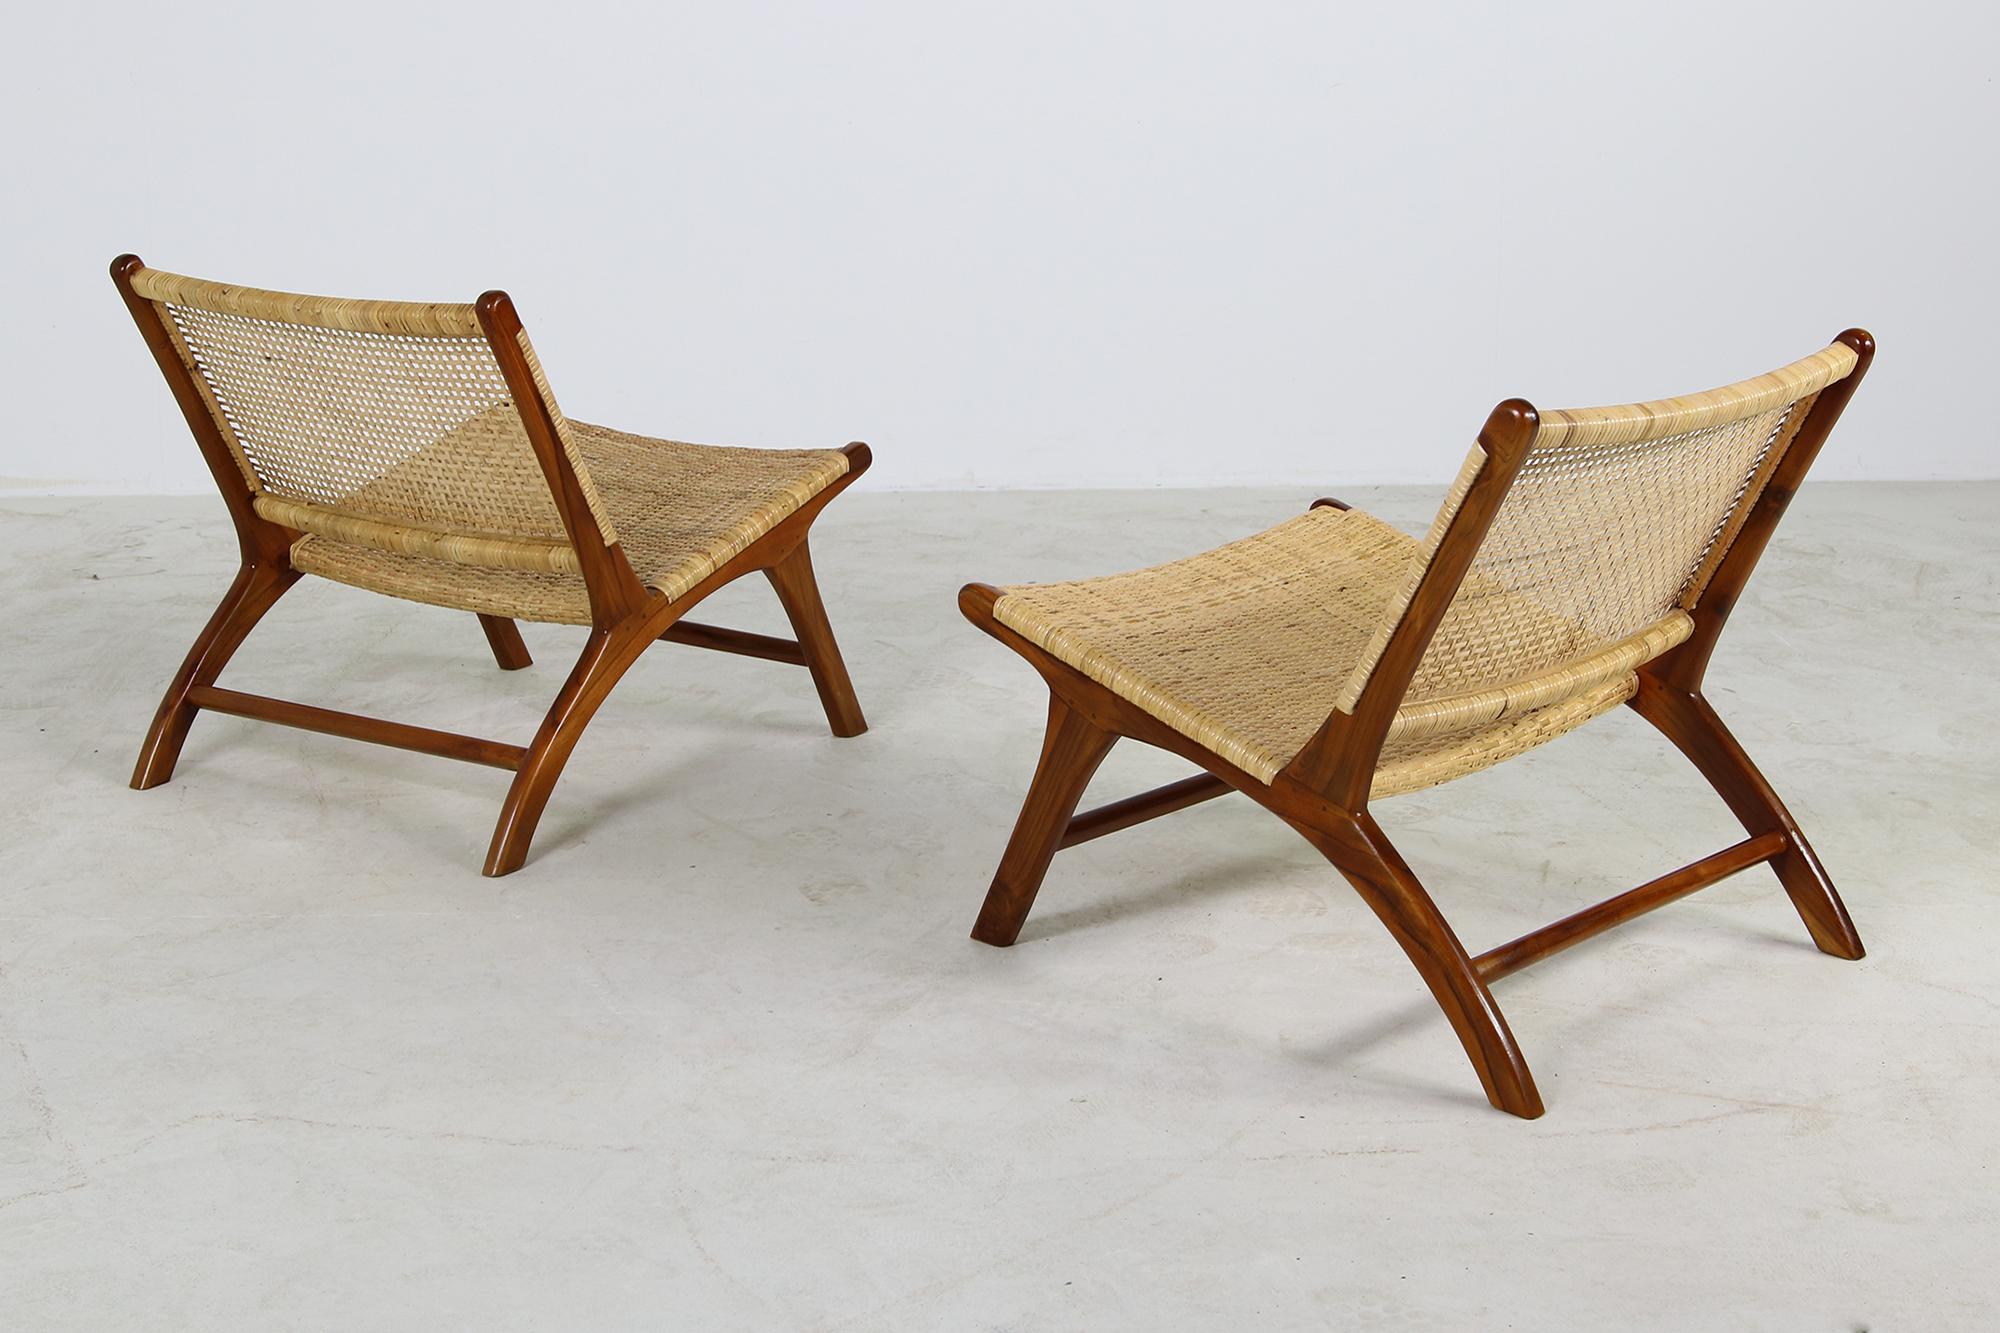 Pair of Solid Teak and Cane Lounge Chairs, Brazilian & Midcentury Style, Modern 1